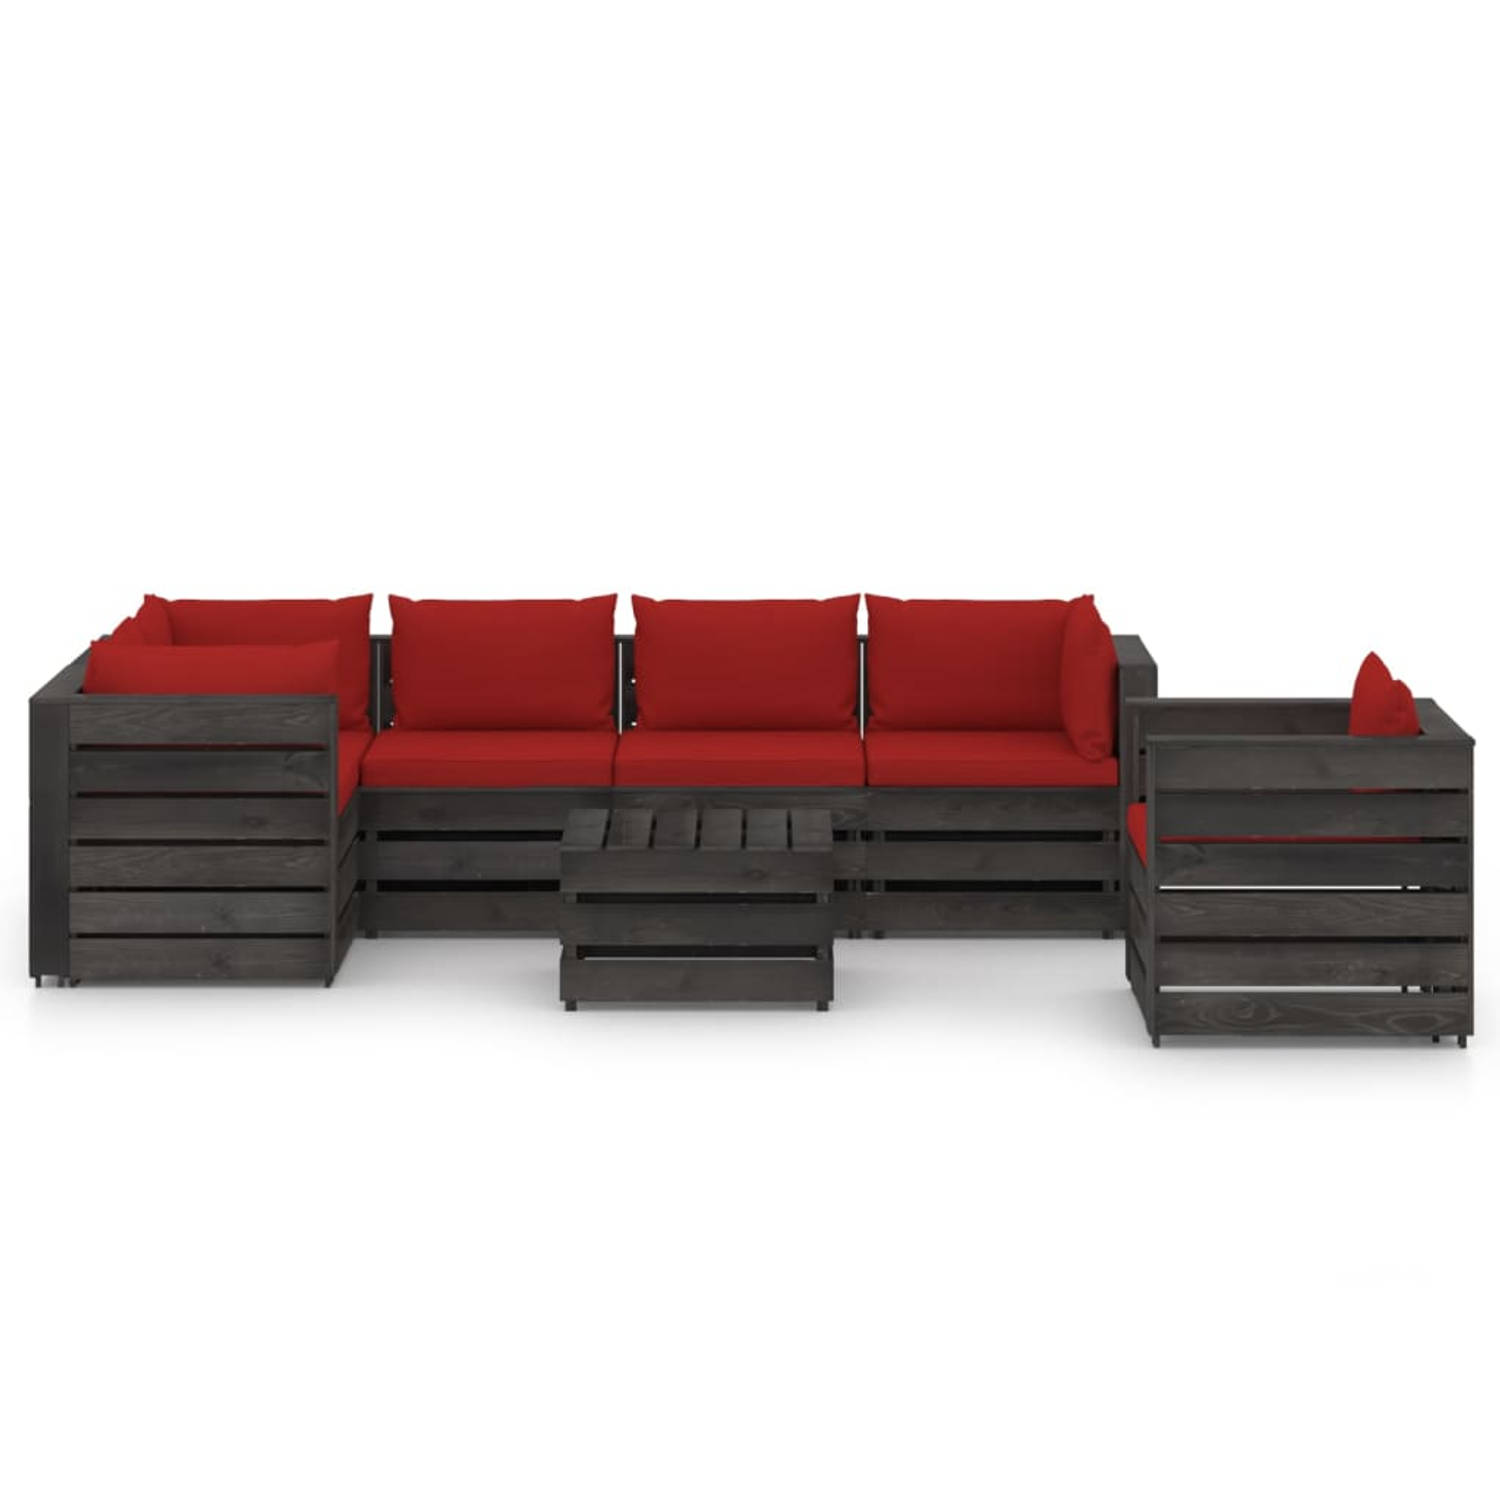 The Living Store Pallet Loungeset - Grenenhout - 69 x 70 x 66 cm - Rood kussen